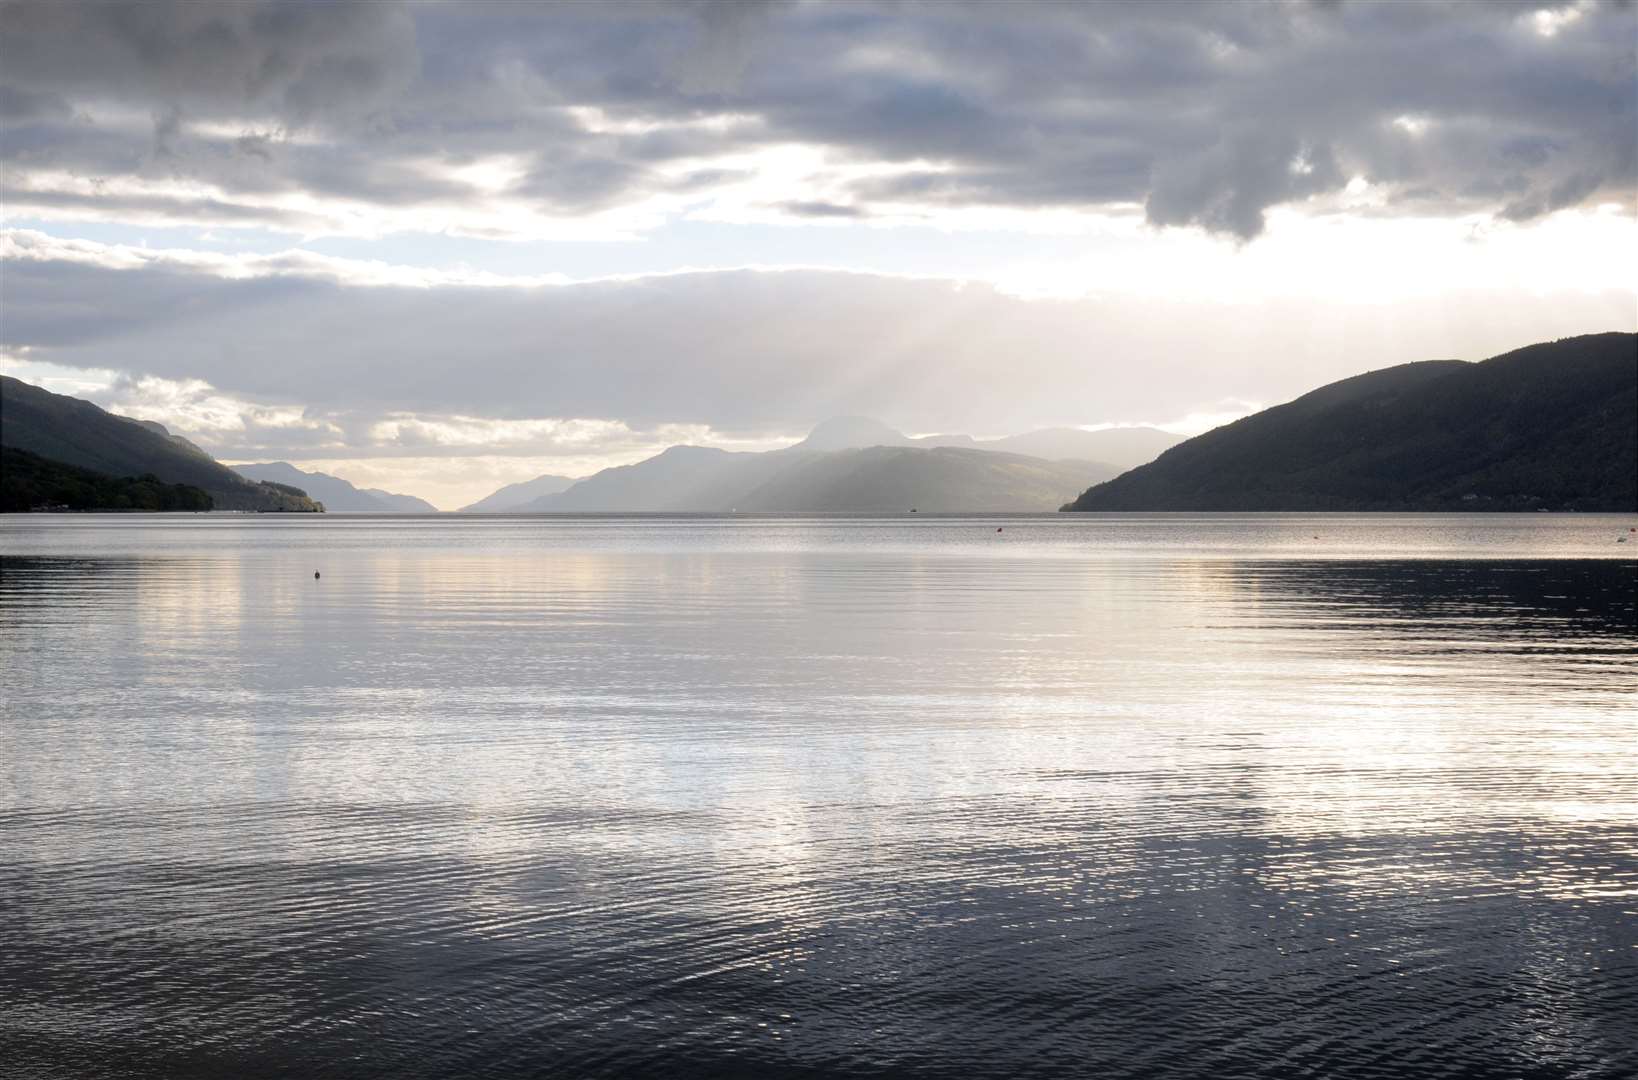 A large animate object seen in Loch Ness by a local man is the third 'sighting' so far this year.